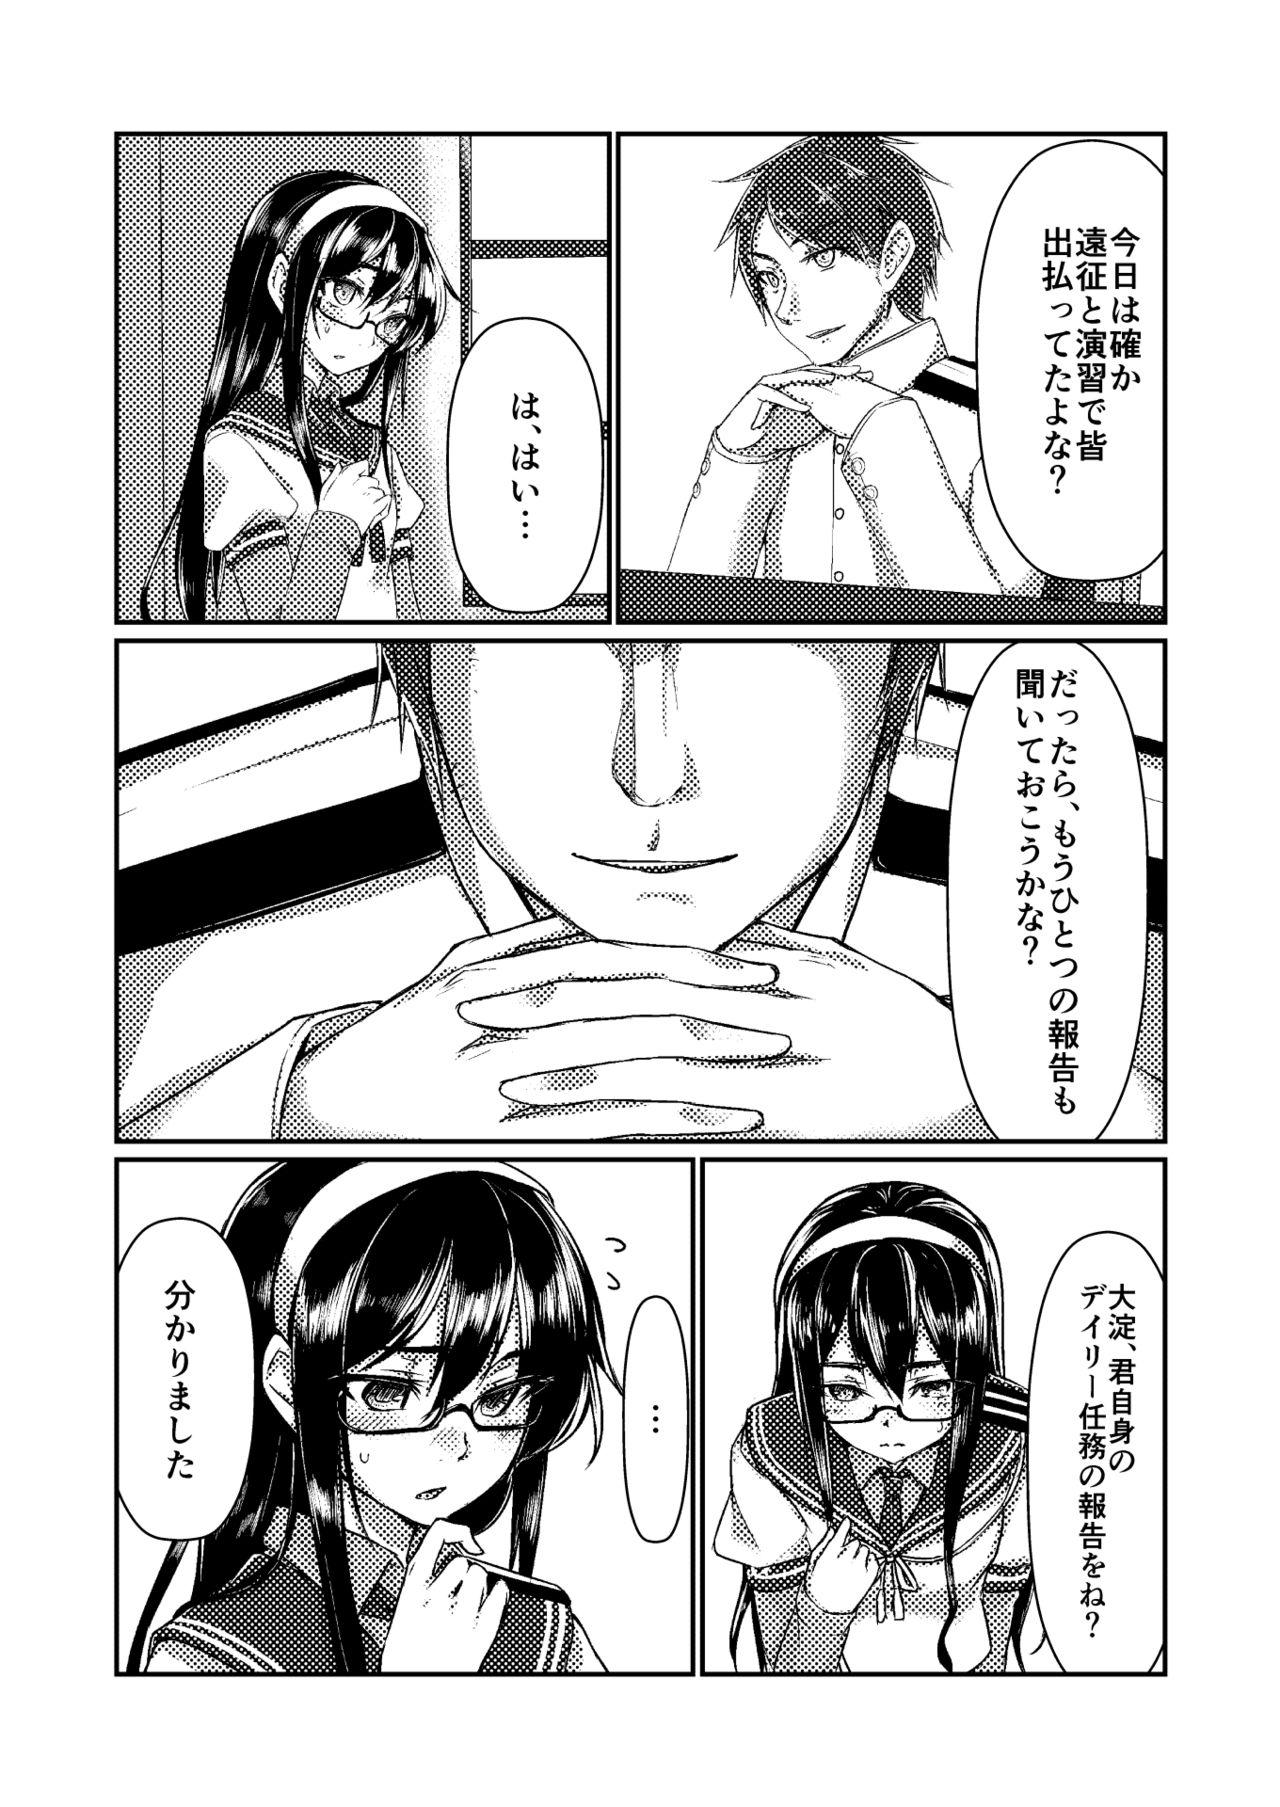 Swallowing Ooyodo to Daily Ninmu - Kantai collection Cdmx - Page 4